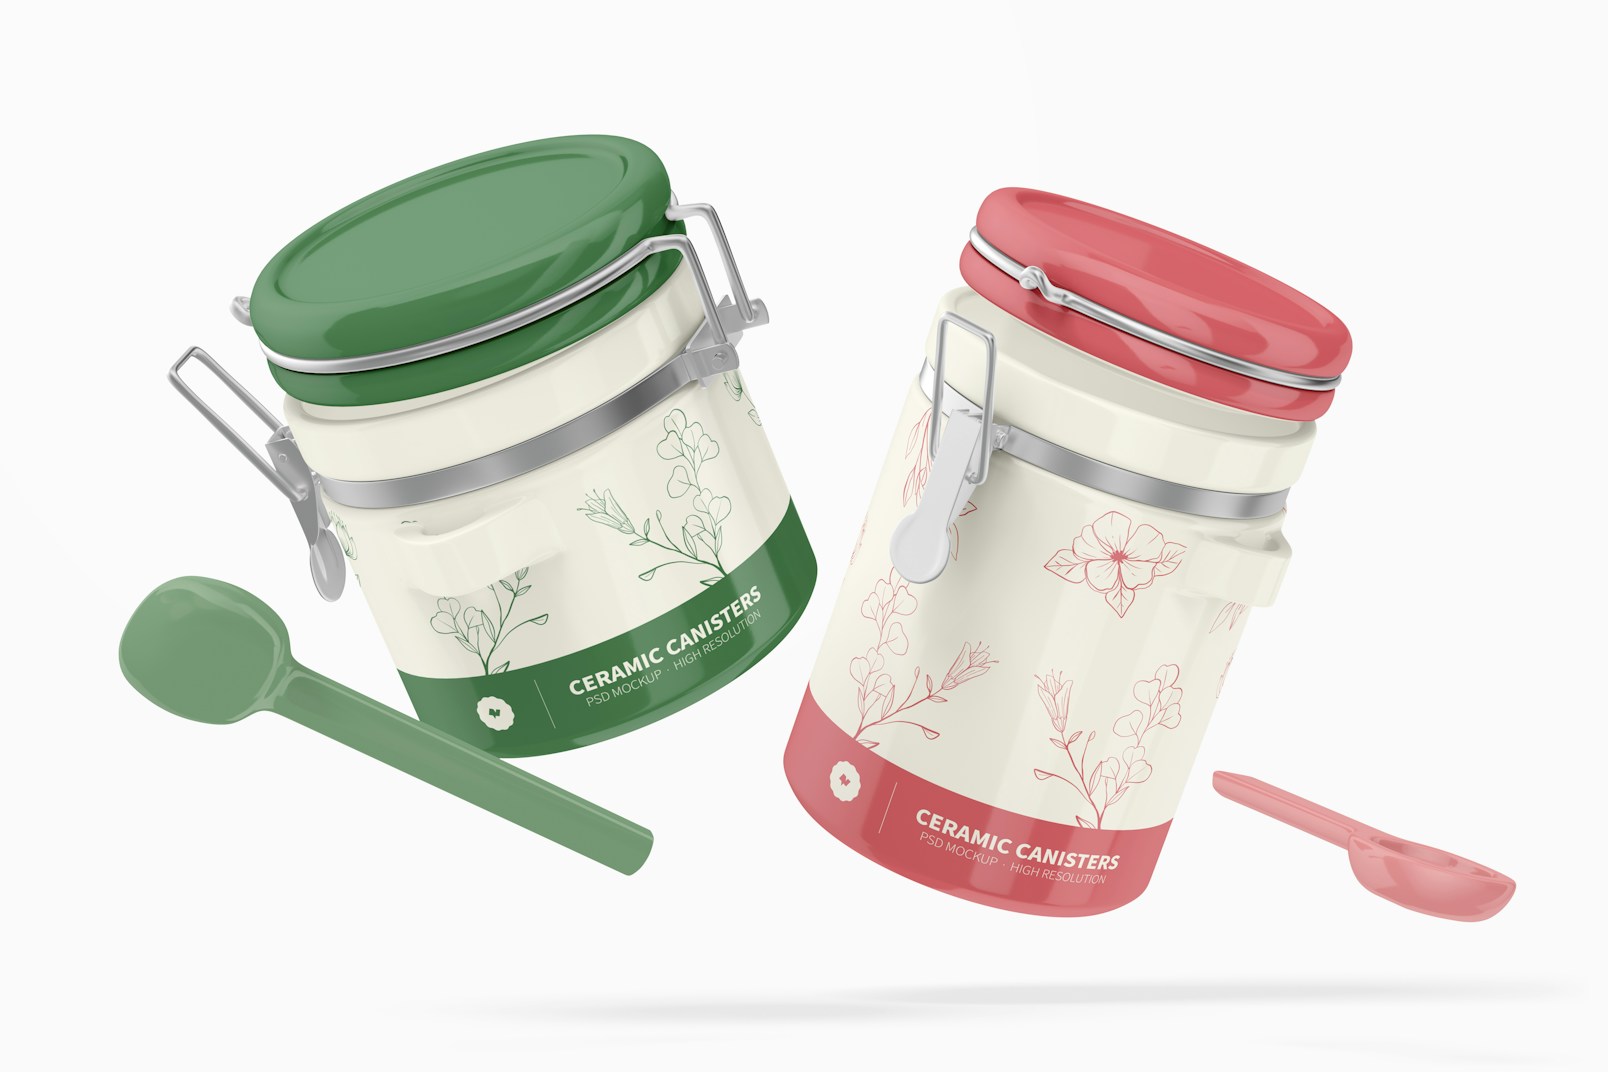 Ceramic Canisters with Spoon Mockup, Floating